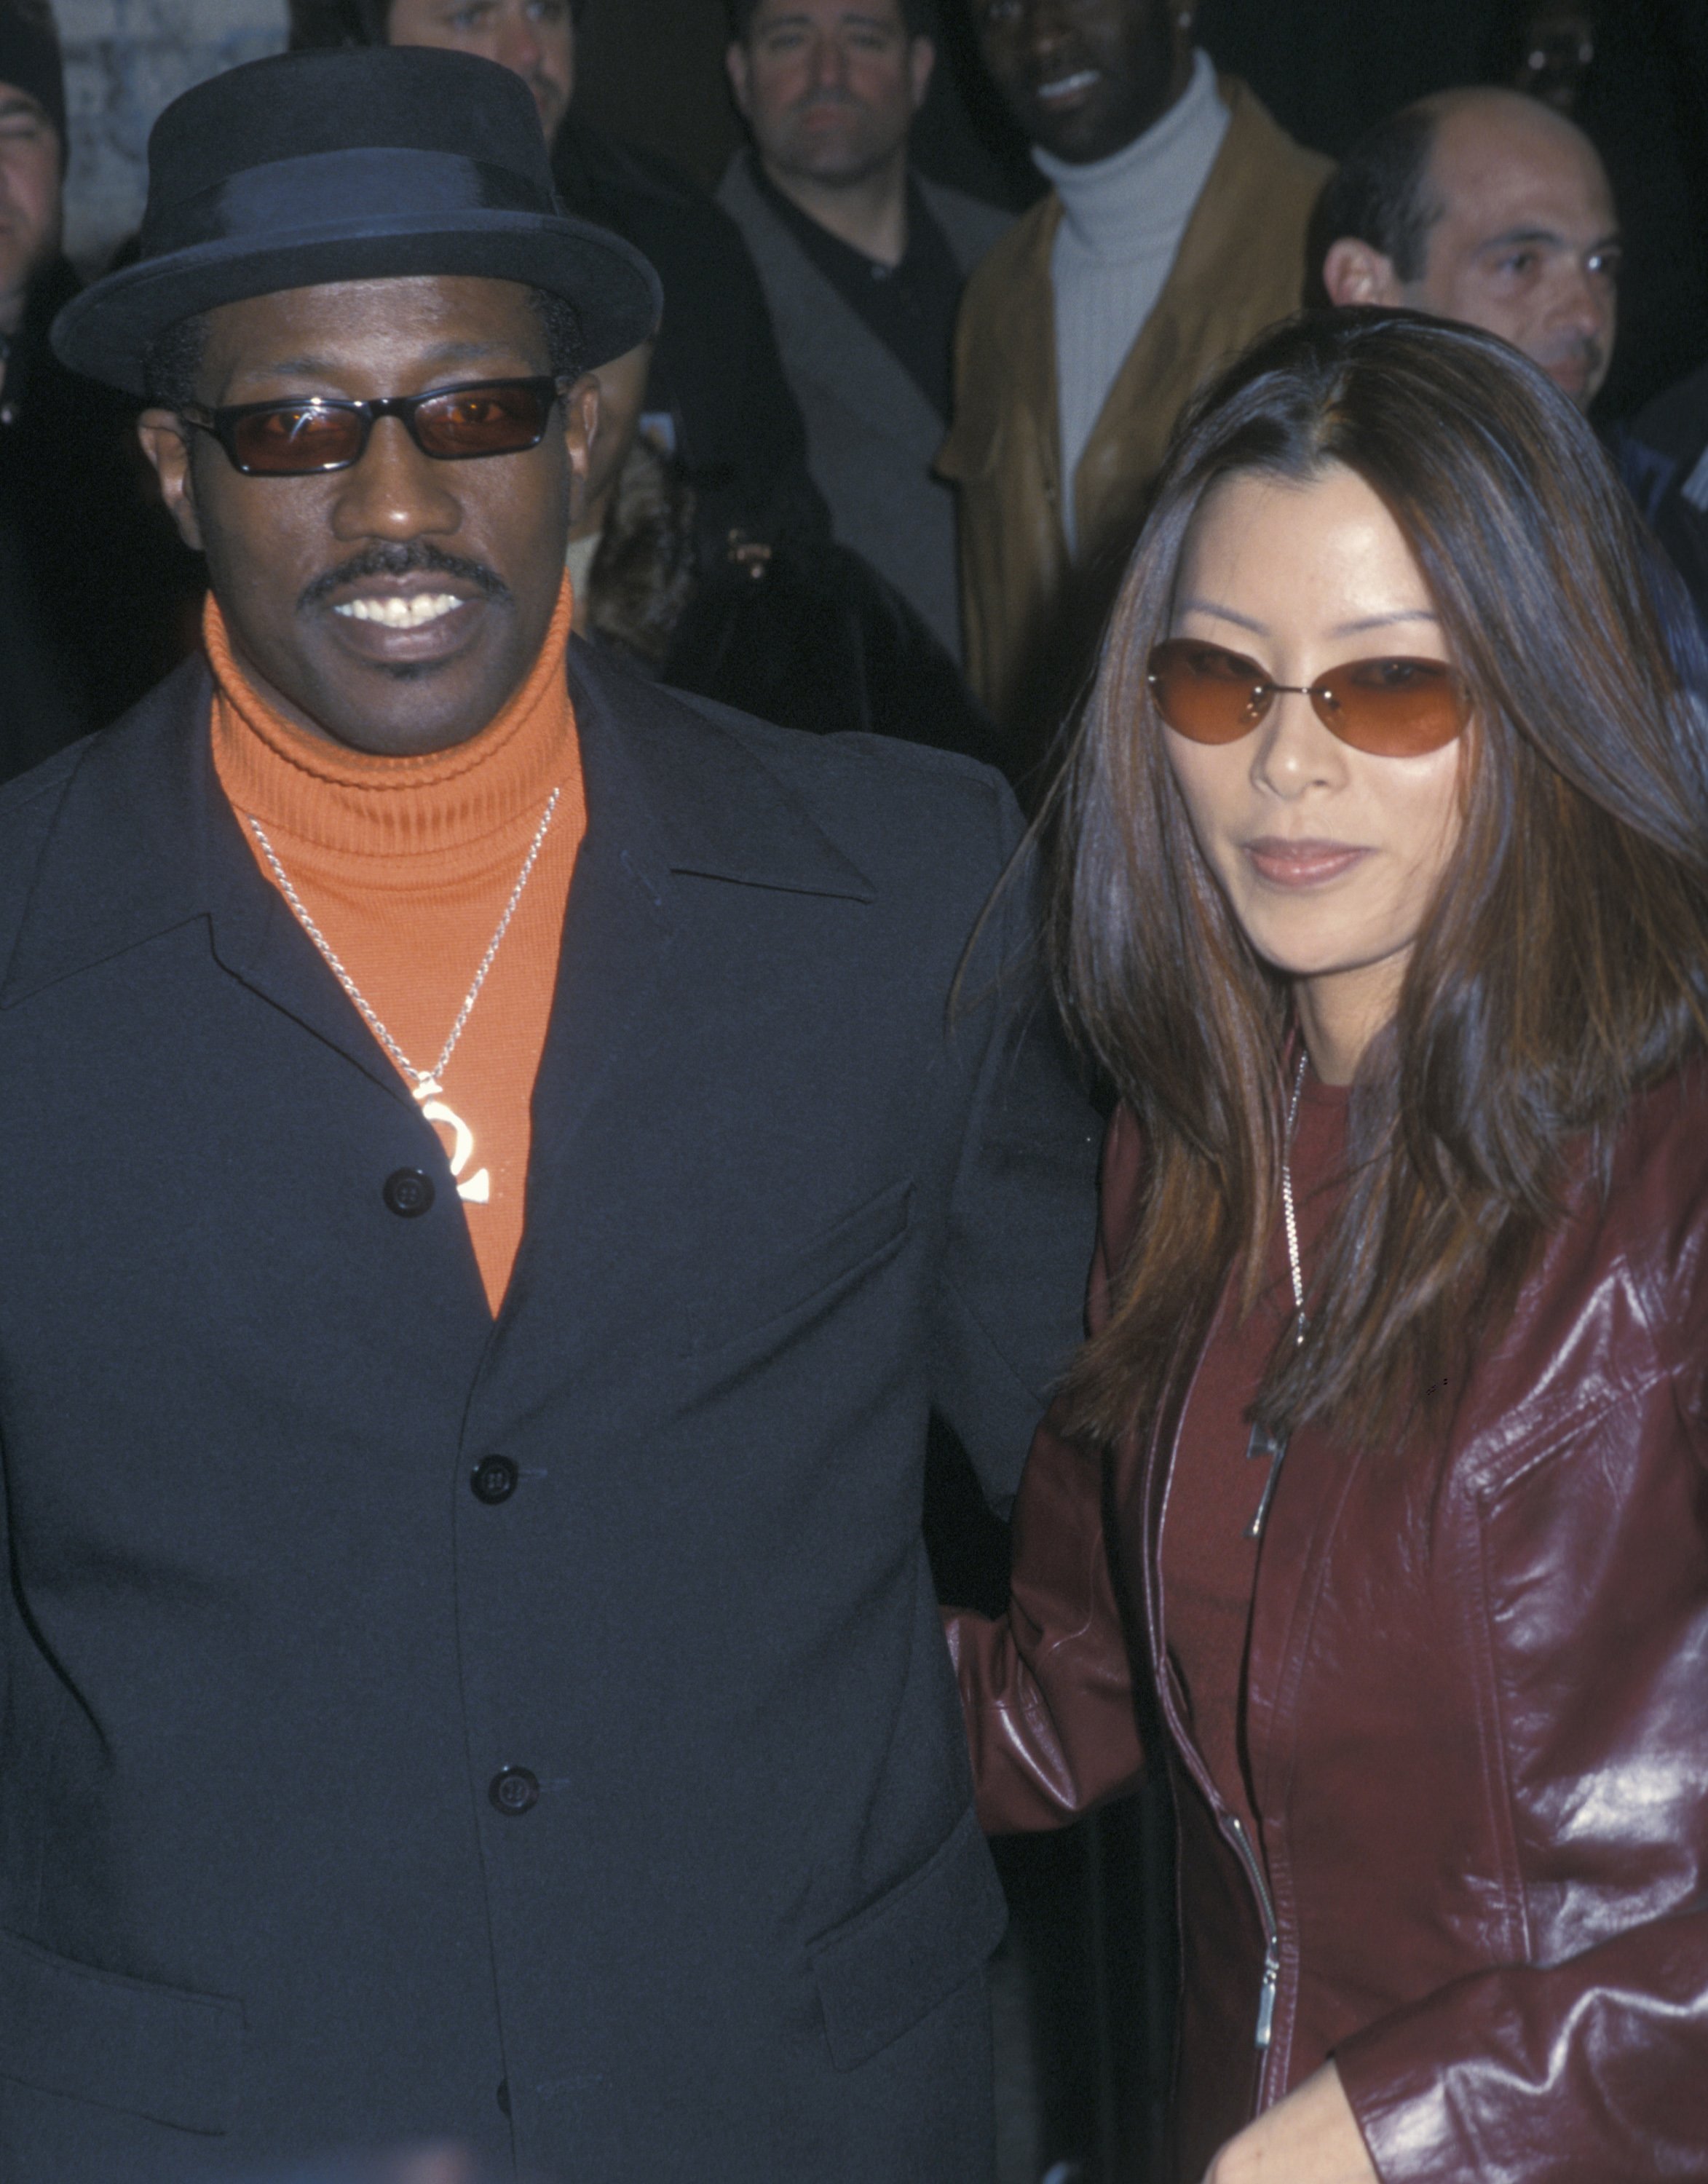 Wesley Snipes and Nakyung Park at the Supper Club on April 7, 2002. | Source: Getty Images